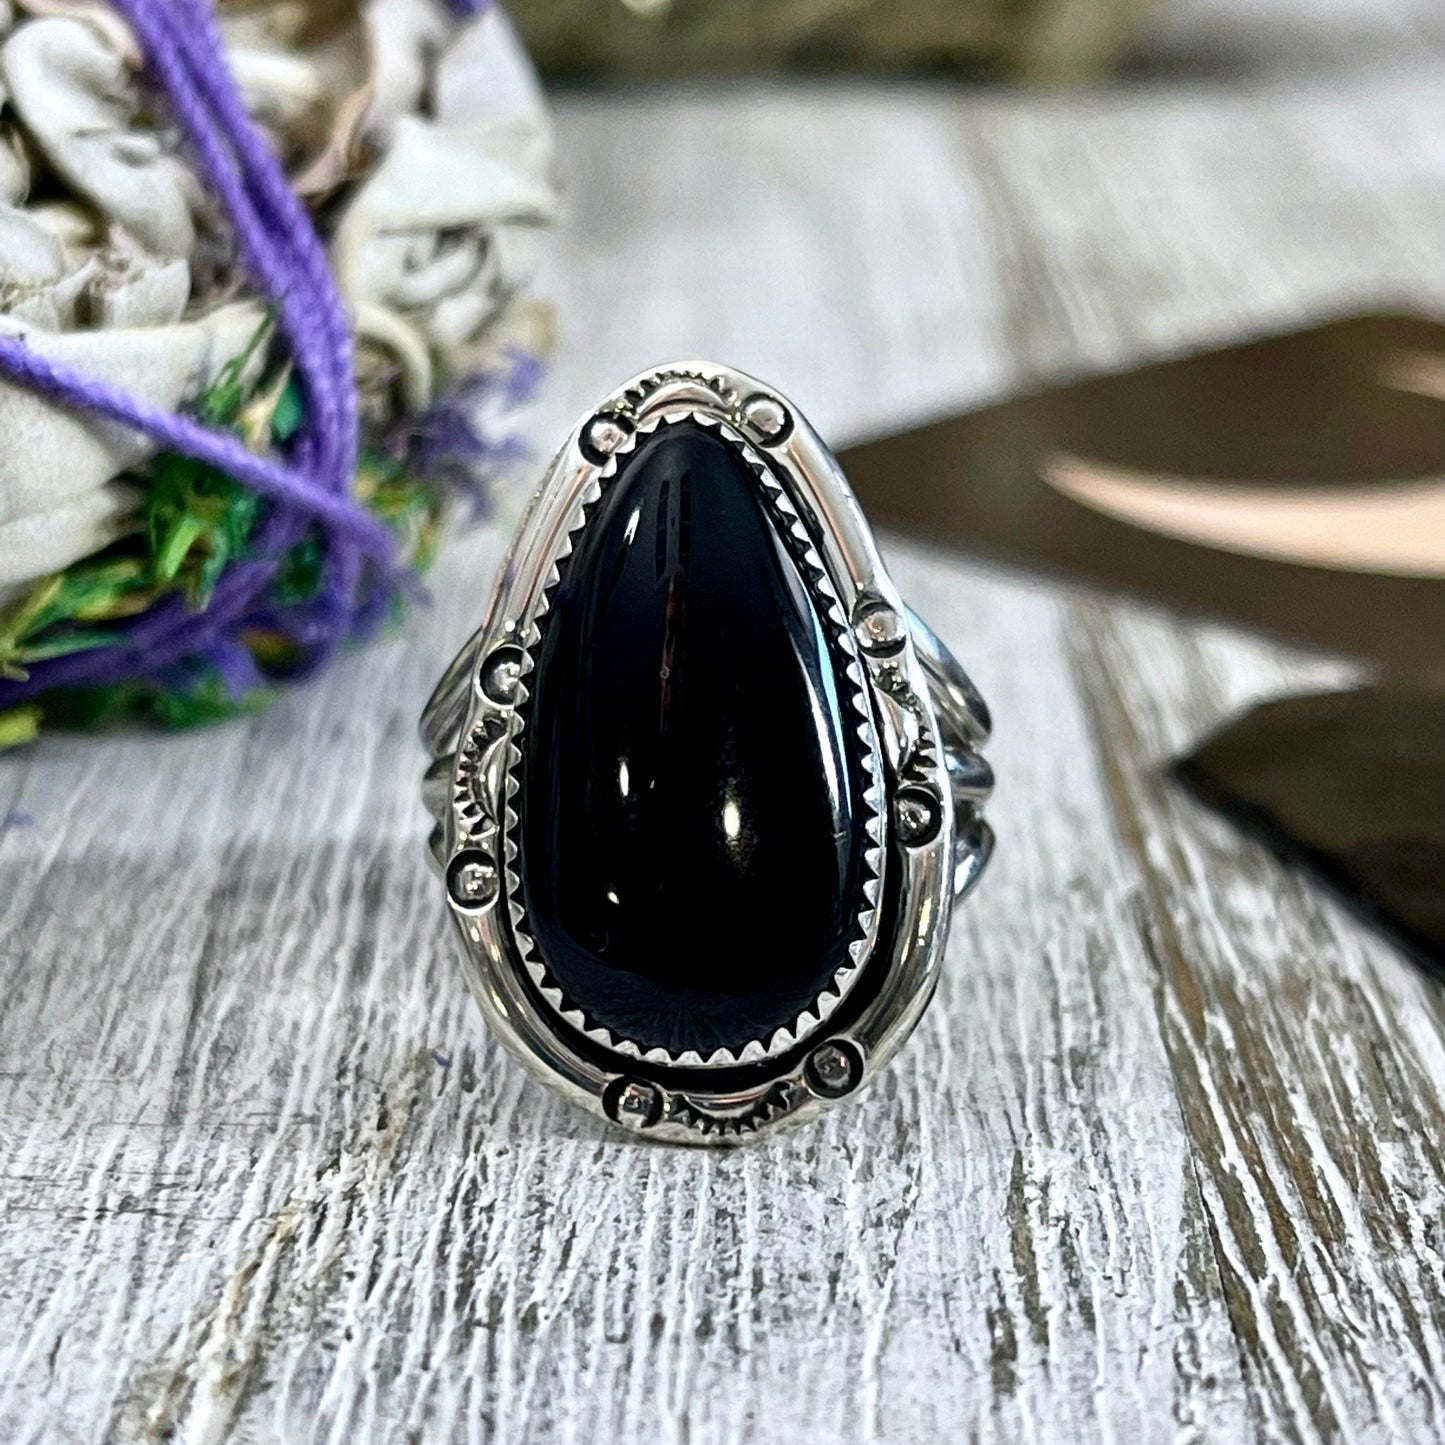 Size 8 Black Onyx Statement Ring Set in Sterling Silver / Curated by FOXLARK Collection